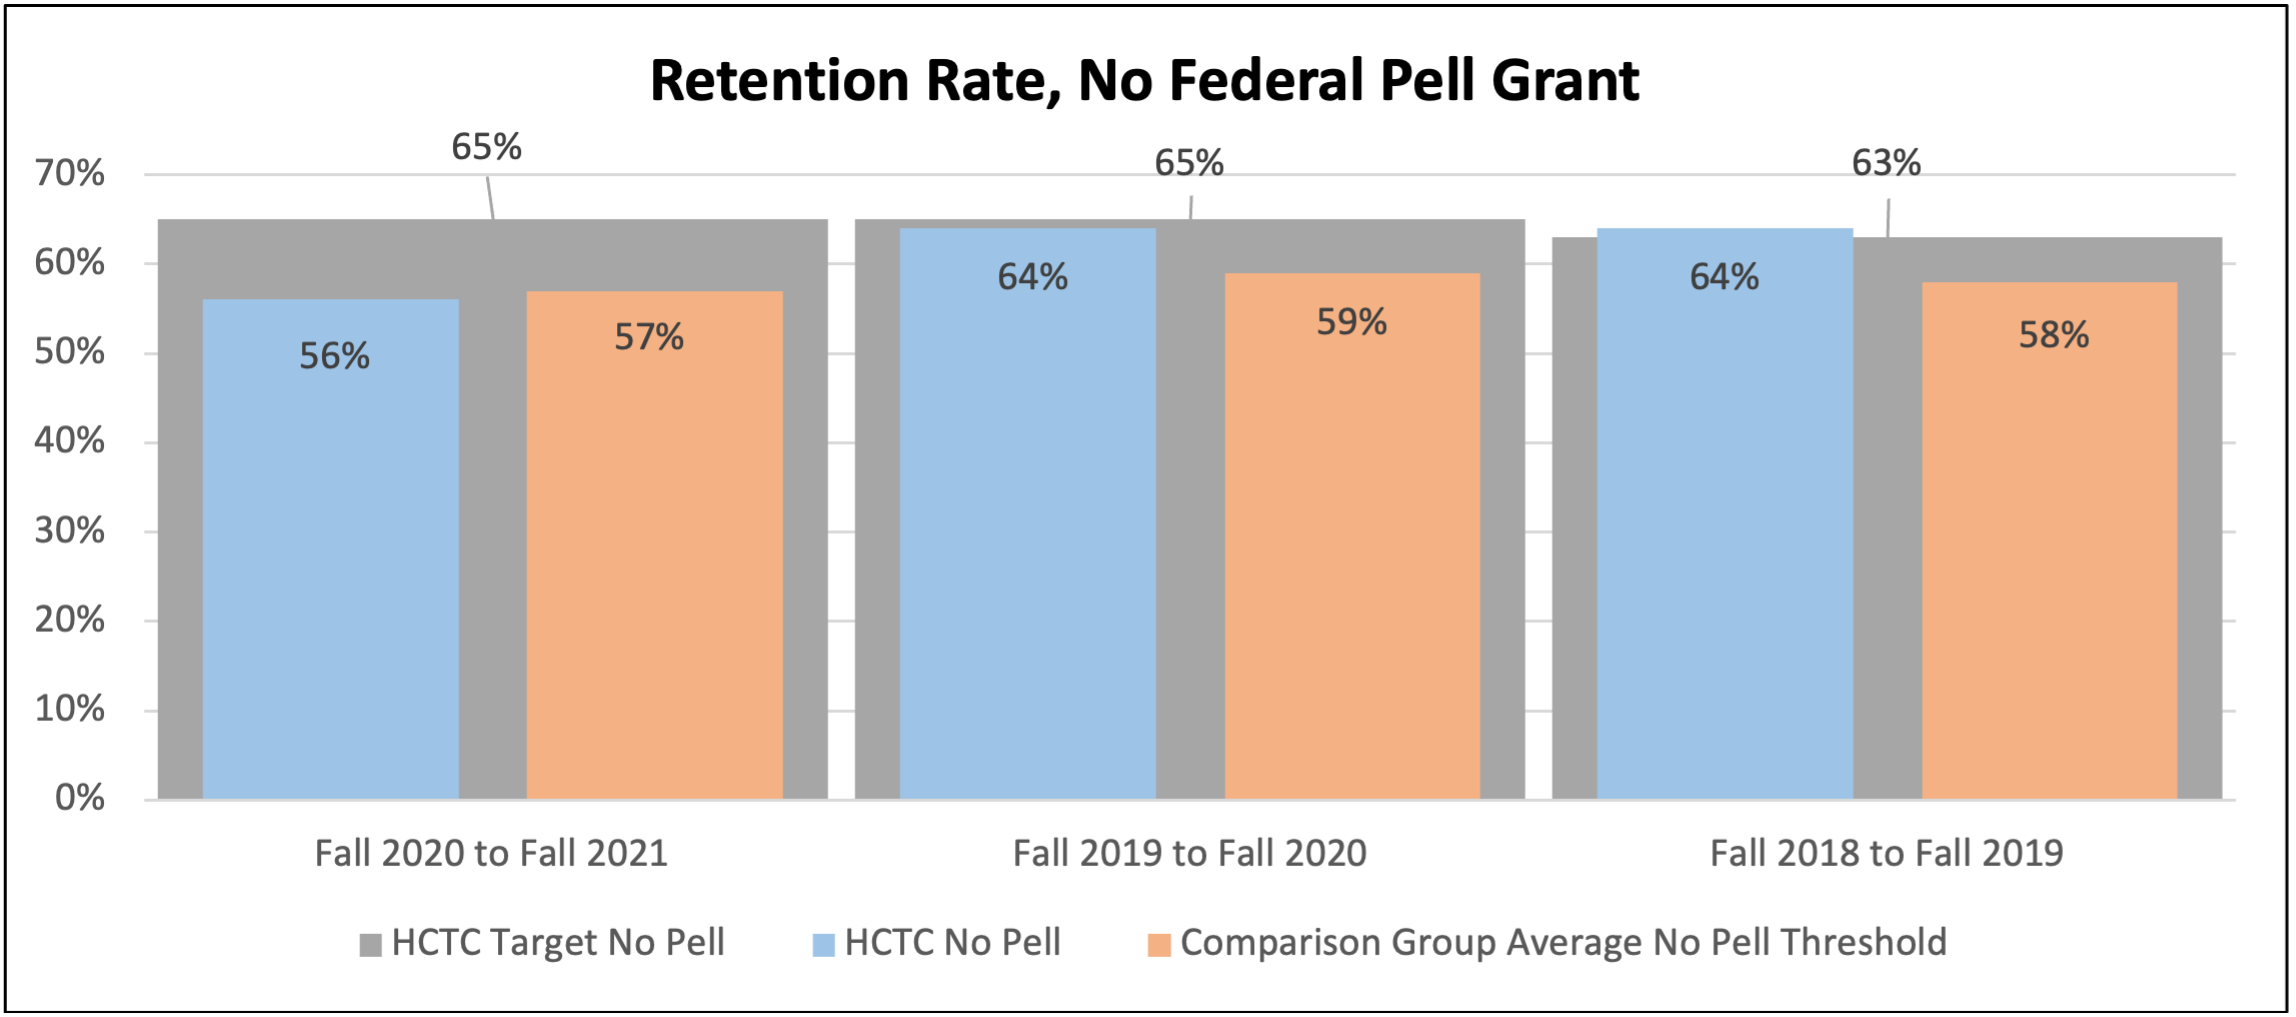 Measured by the percentage of first-time credential-seeking students from the previous summer/fall who either re-enrolled or successfully completed their program by the current fall disaggregated by students who received a federal Pell grant vs. students who did not receive a federal Pell grant.  HCTC's threshold is to meet or exceed the median retention rate for students who received a federal Pell grant vs. students who did not receive a federal Pell grant for its comparison groups.